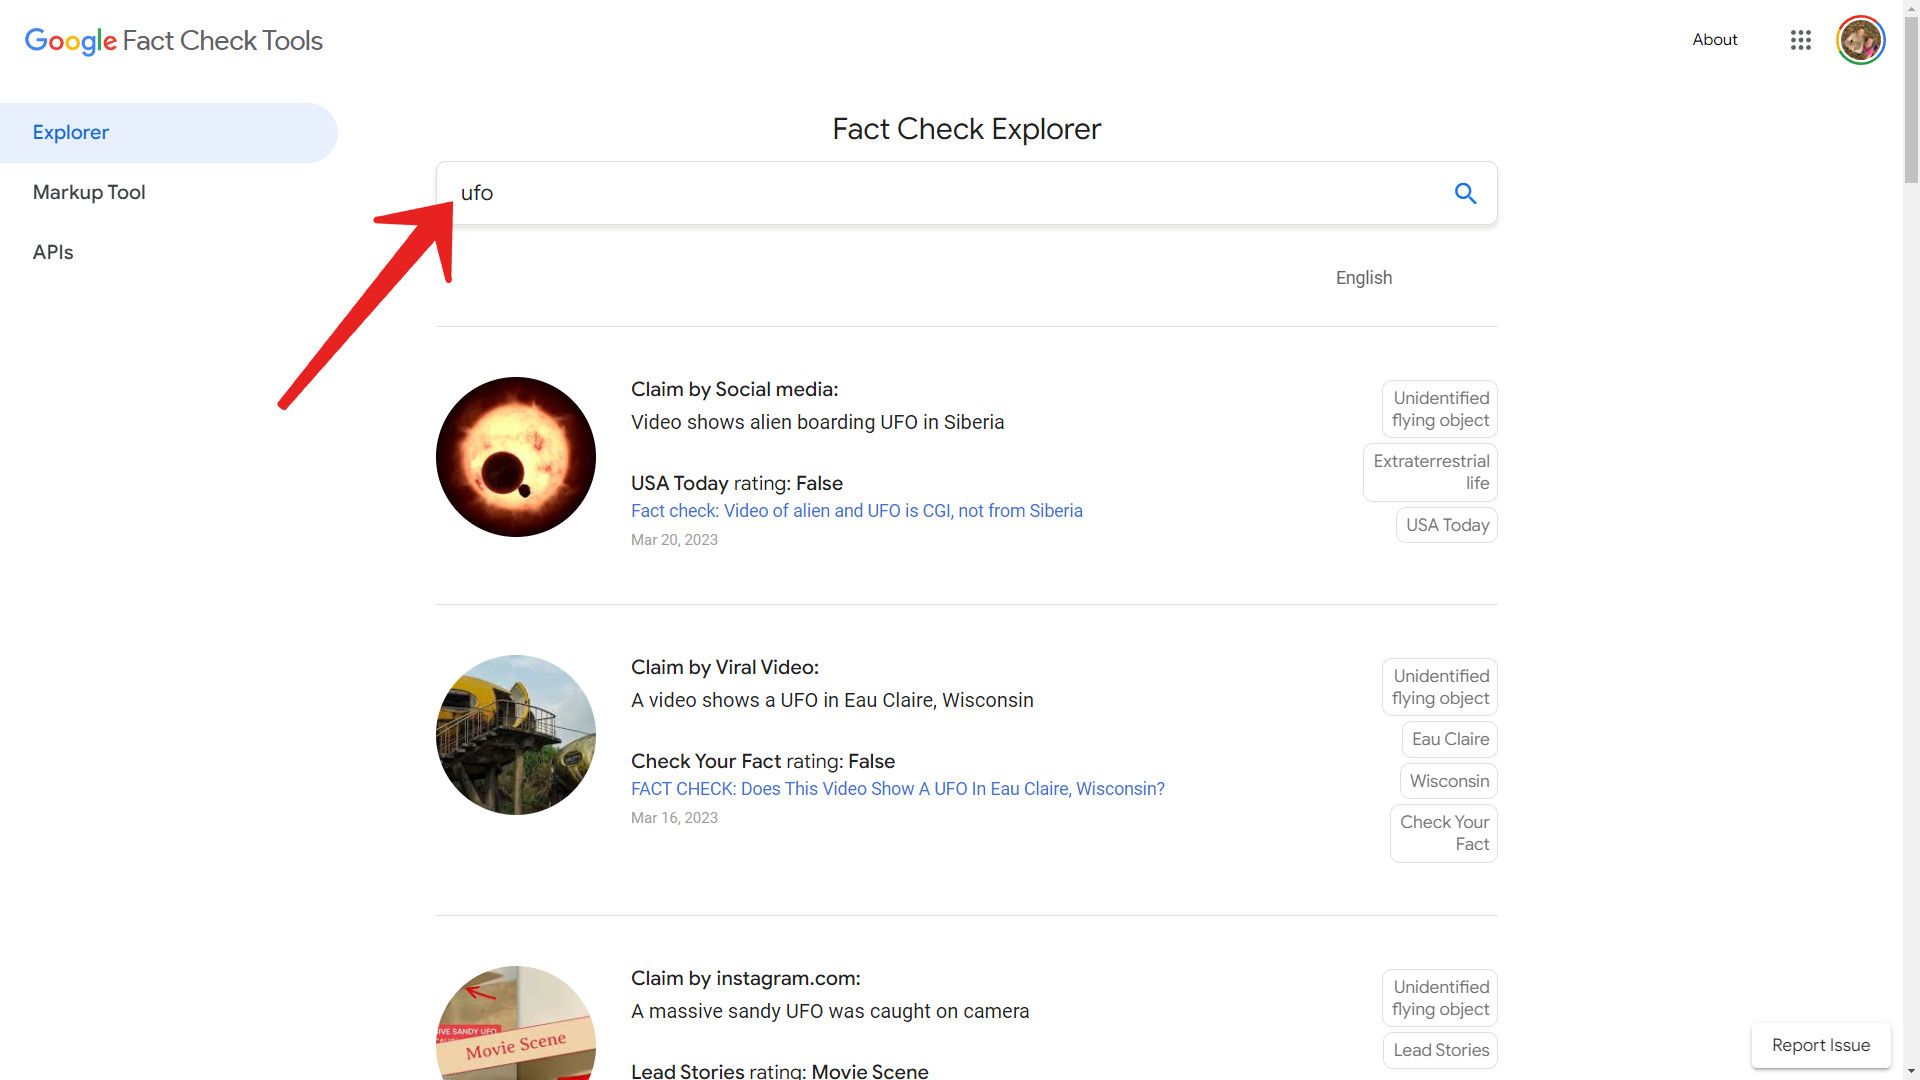 A screenshot of Google Fact Check Explorer showing the results of a keyword search.